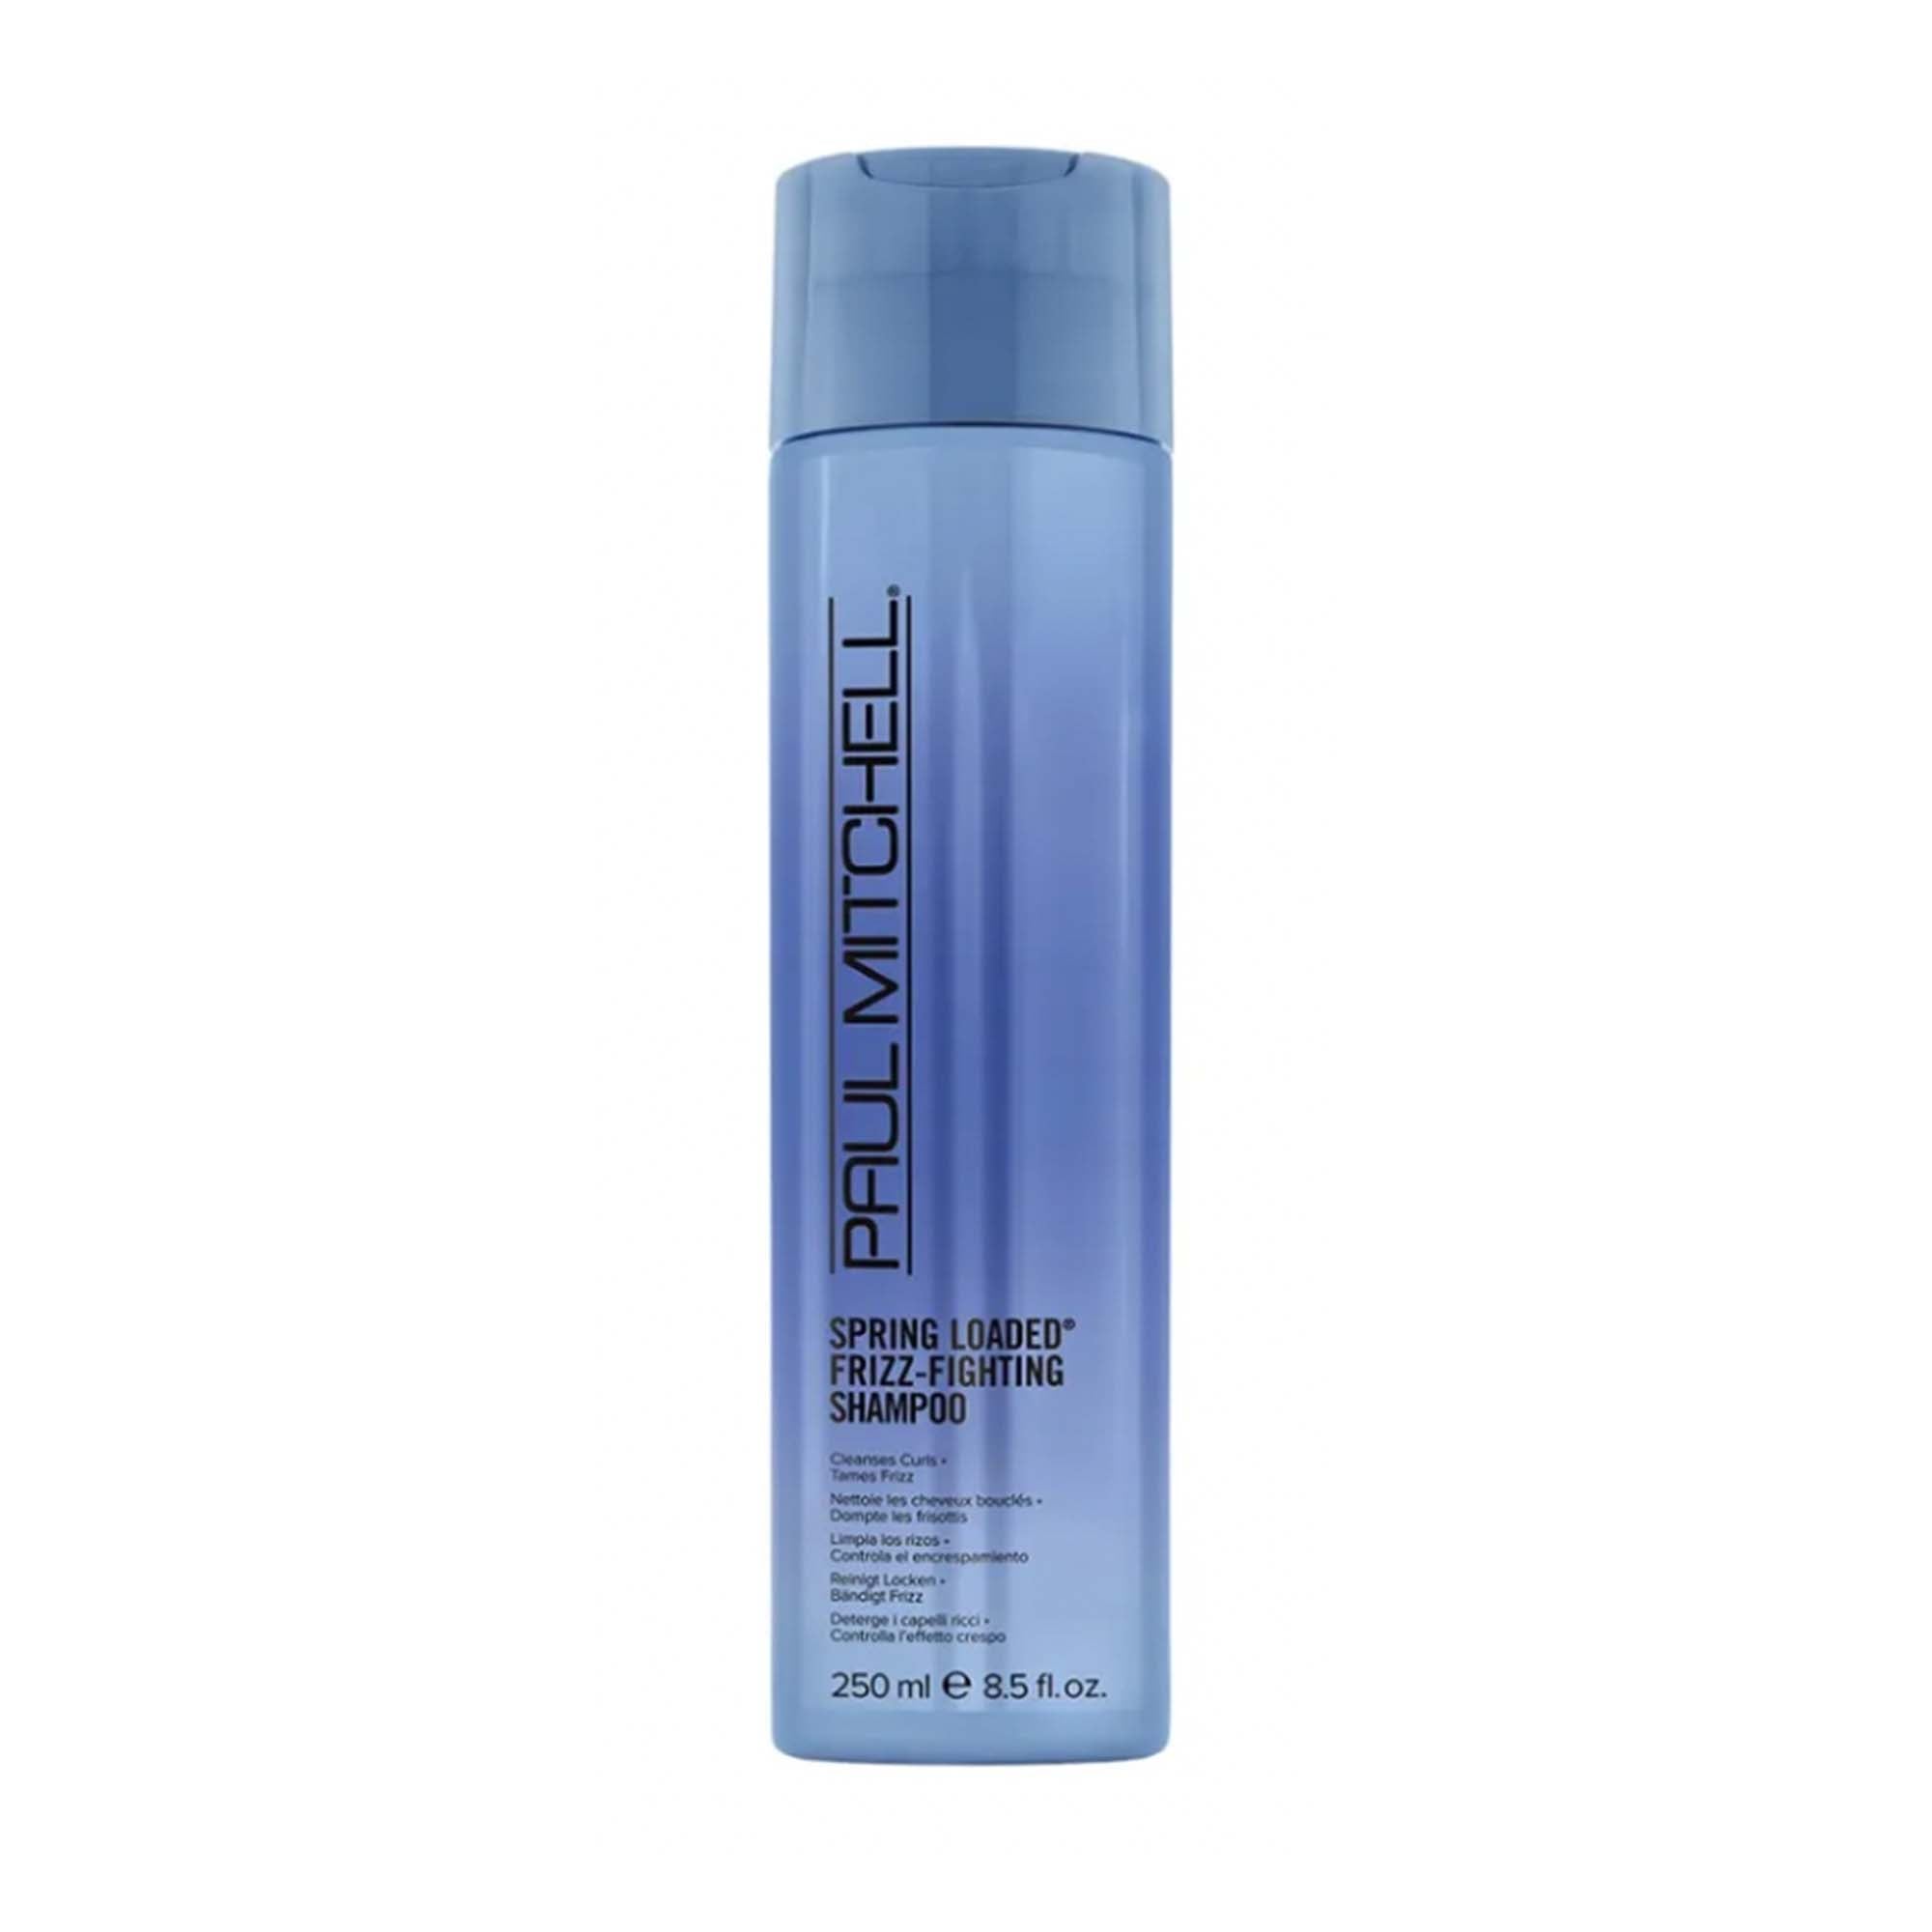 Paul Mitchell Spring Loaded Frizz-Fighting Duo